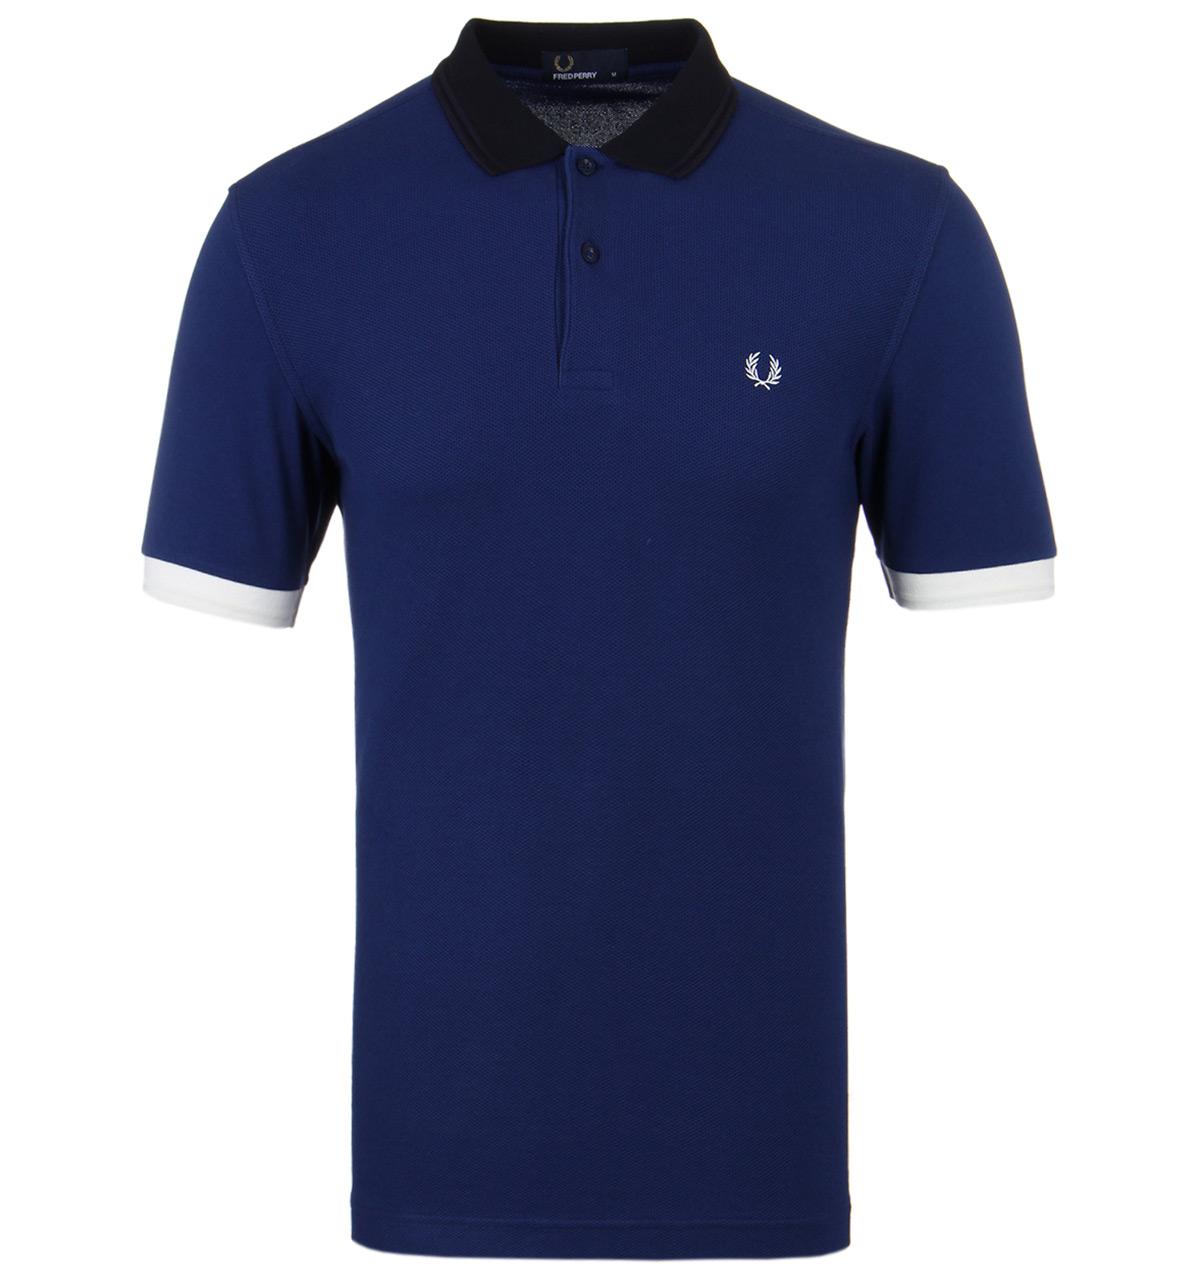 Lyst - Fred Perry Medival Blue Colour Block Pique Polo Shirt in Blue ...